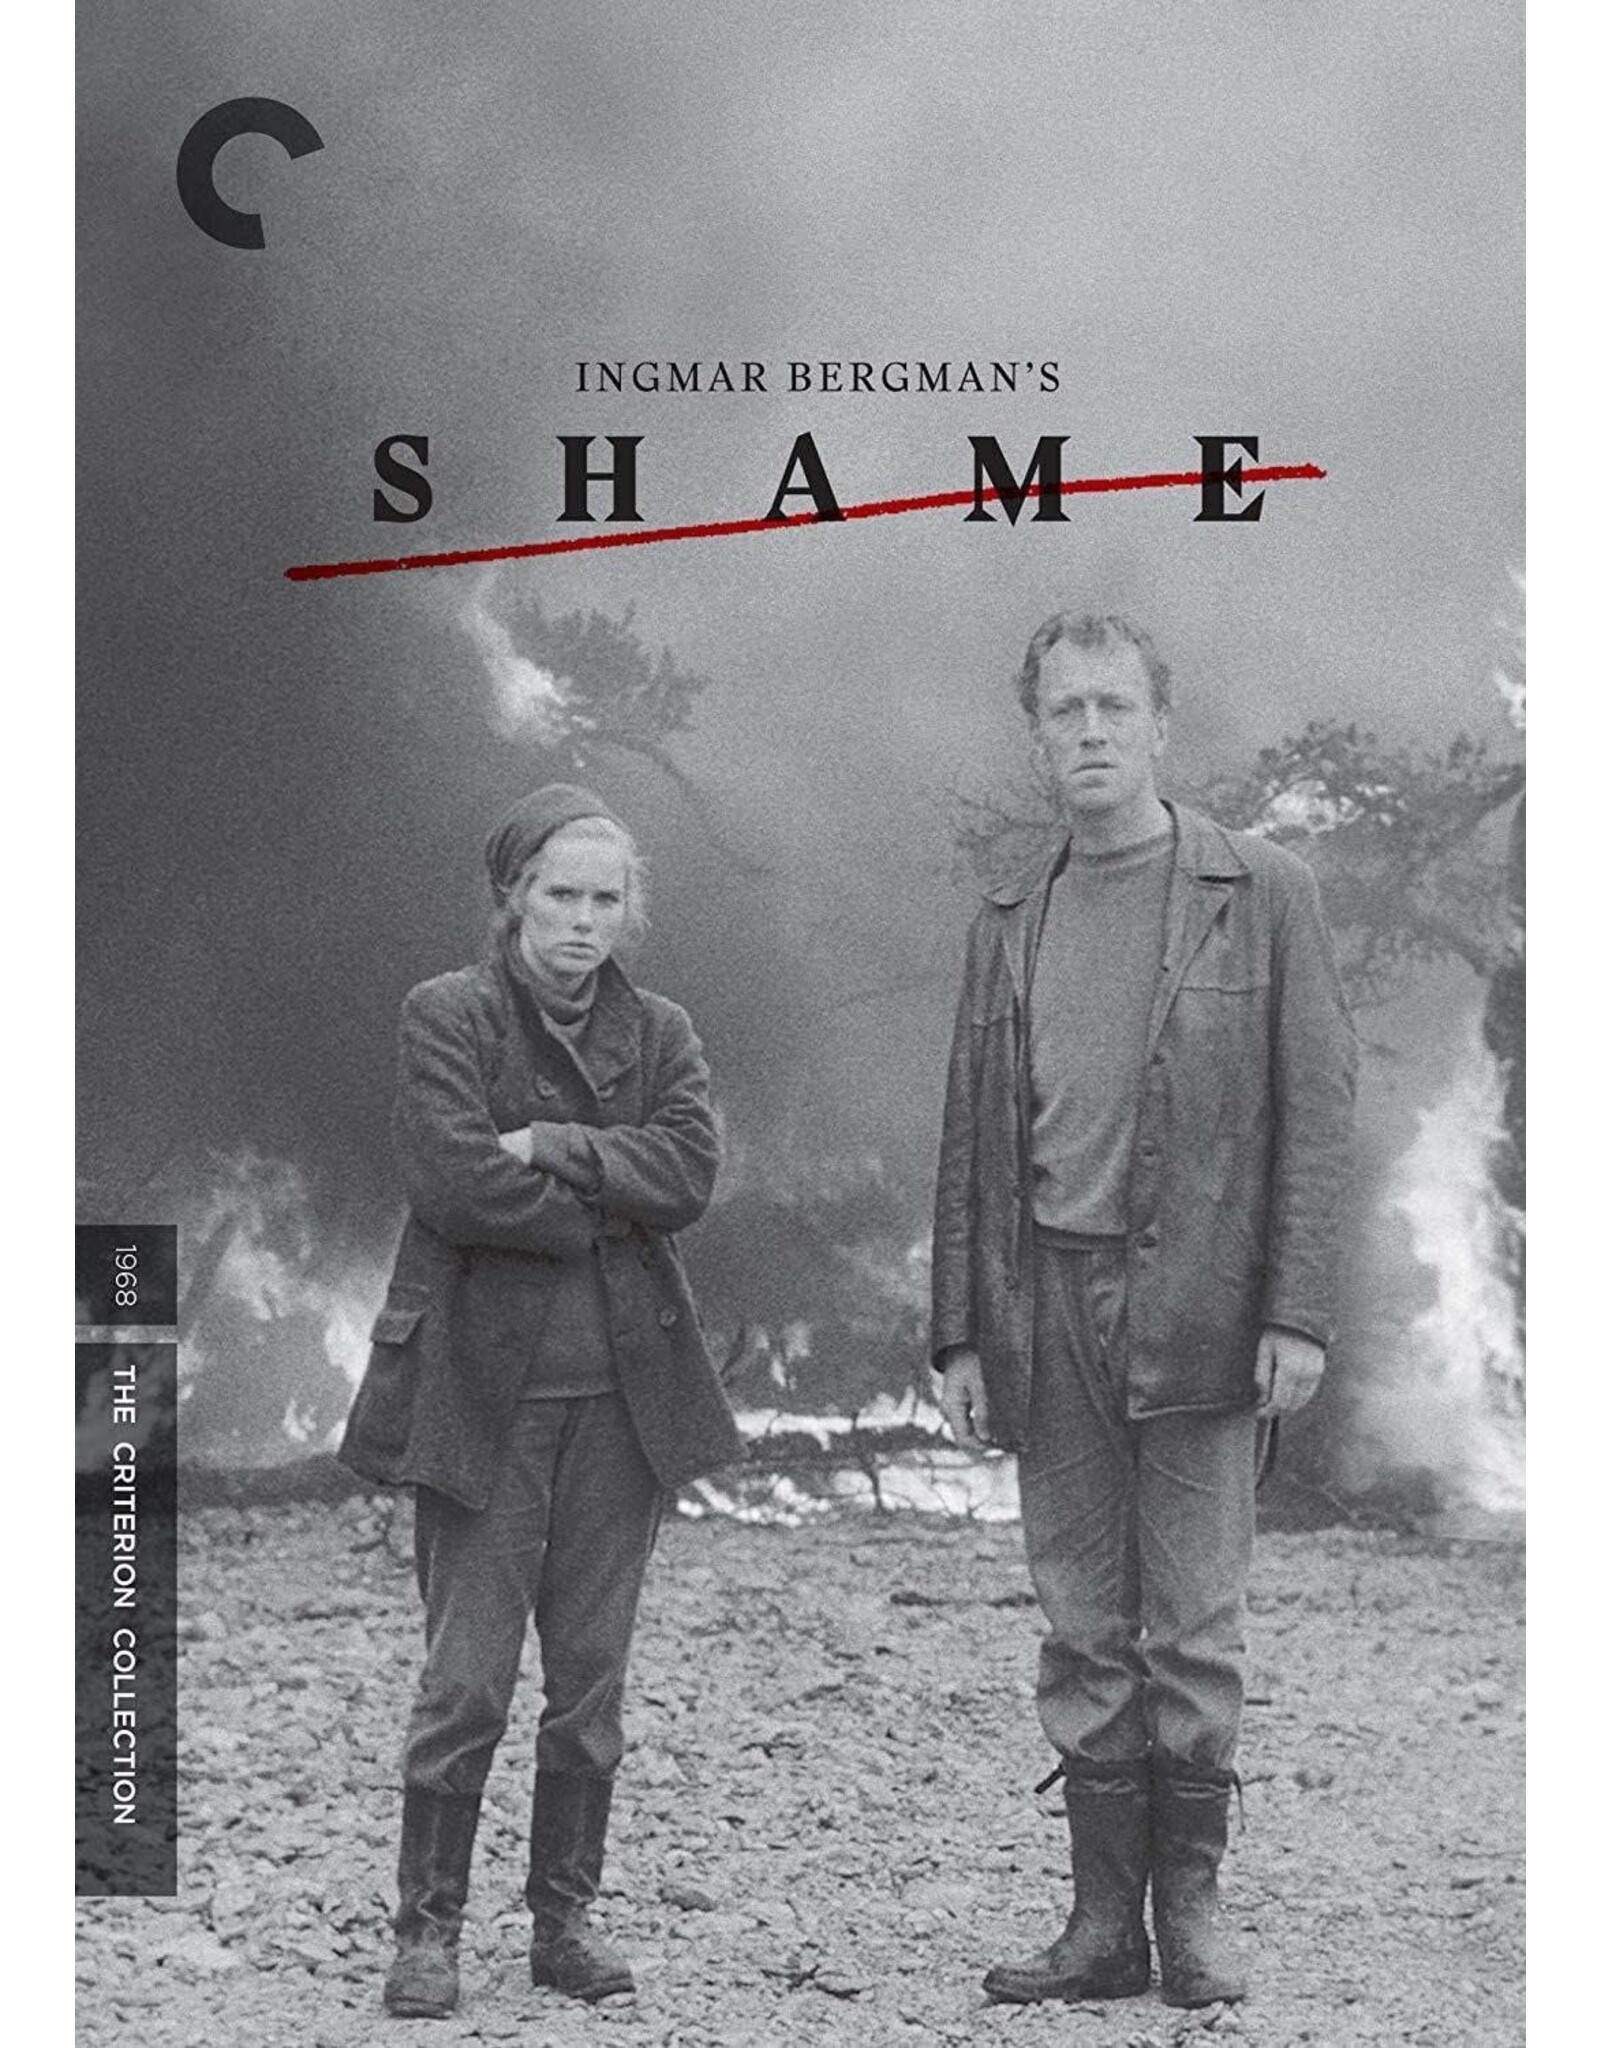 Criterion Collection Shame - Criterion Collection (Used)